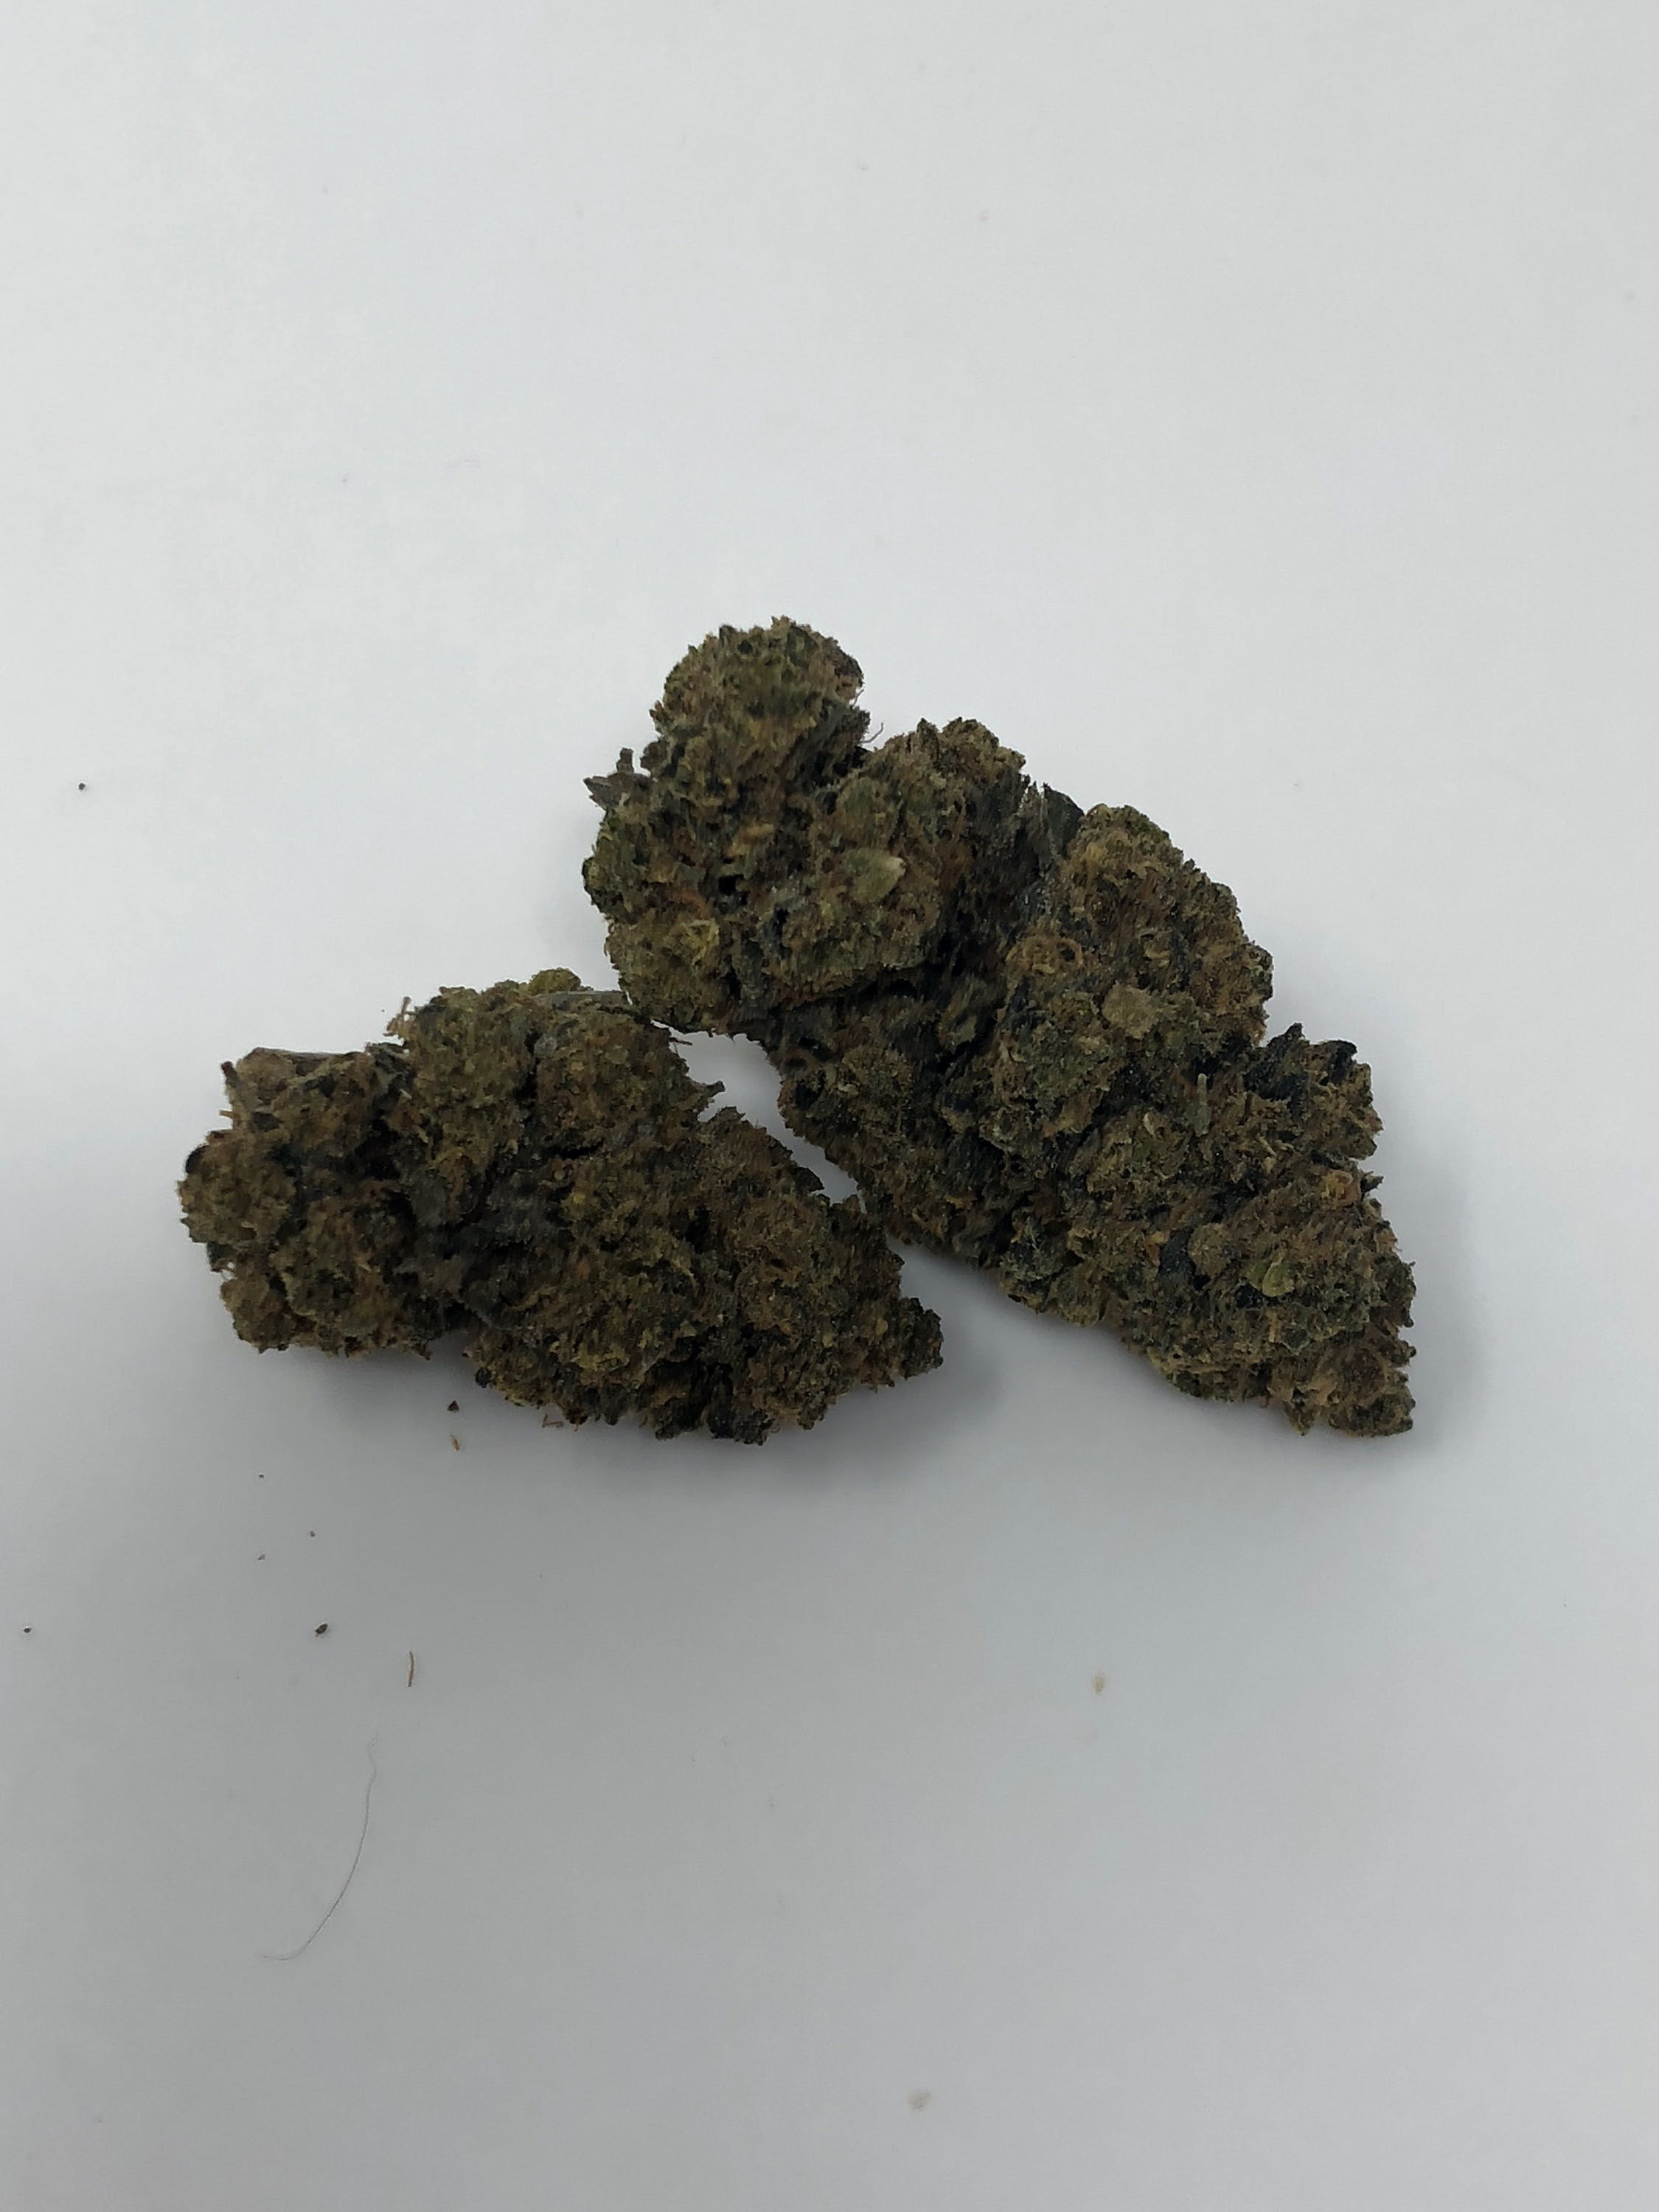 marijuana-dispensaries-by-appointment-only-2c-call-to-verify-fresno-cookie-glue-24100-ounce-special